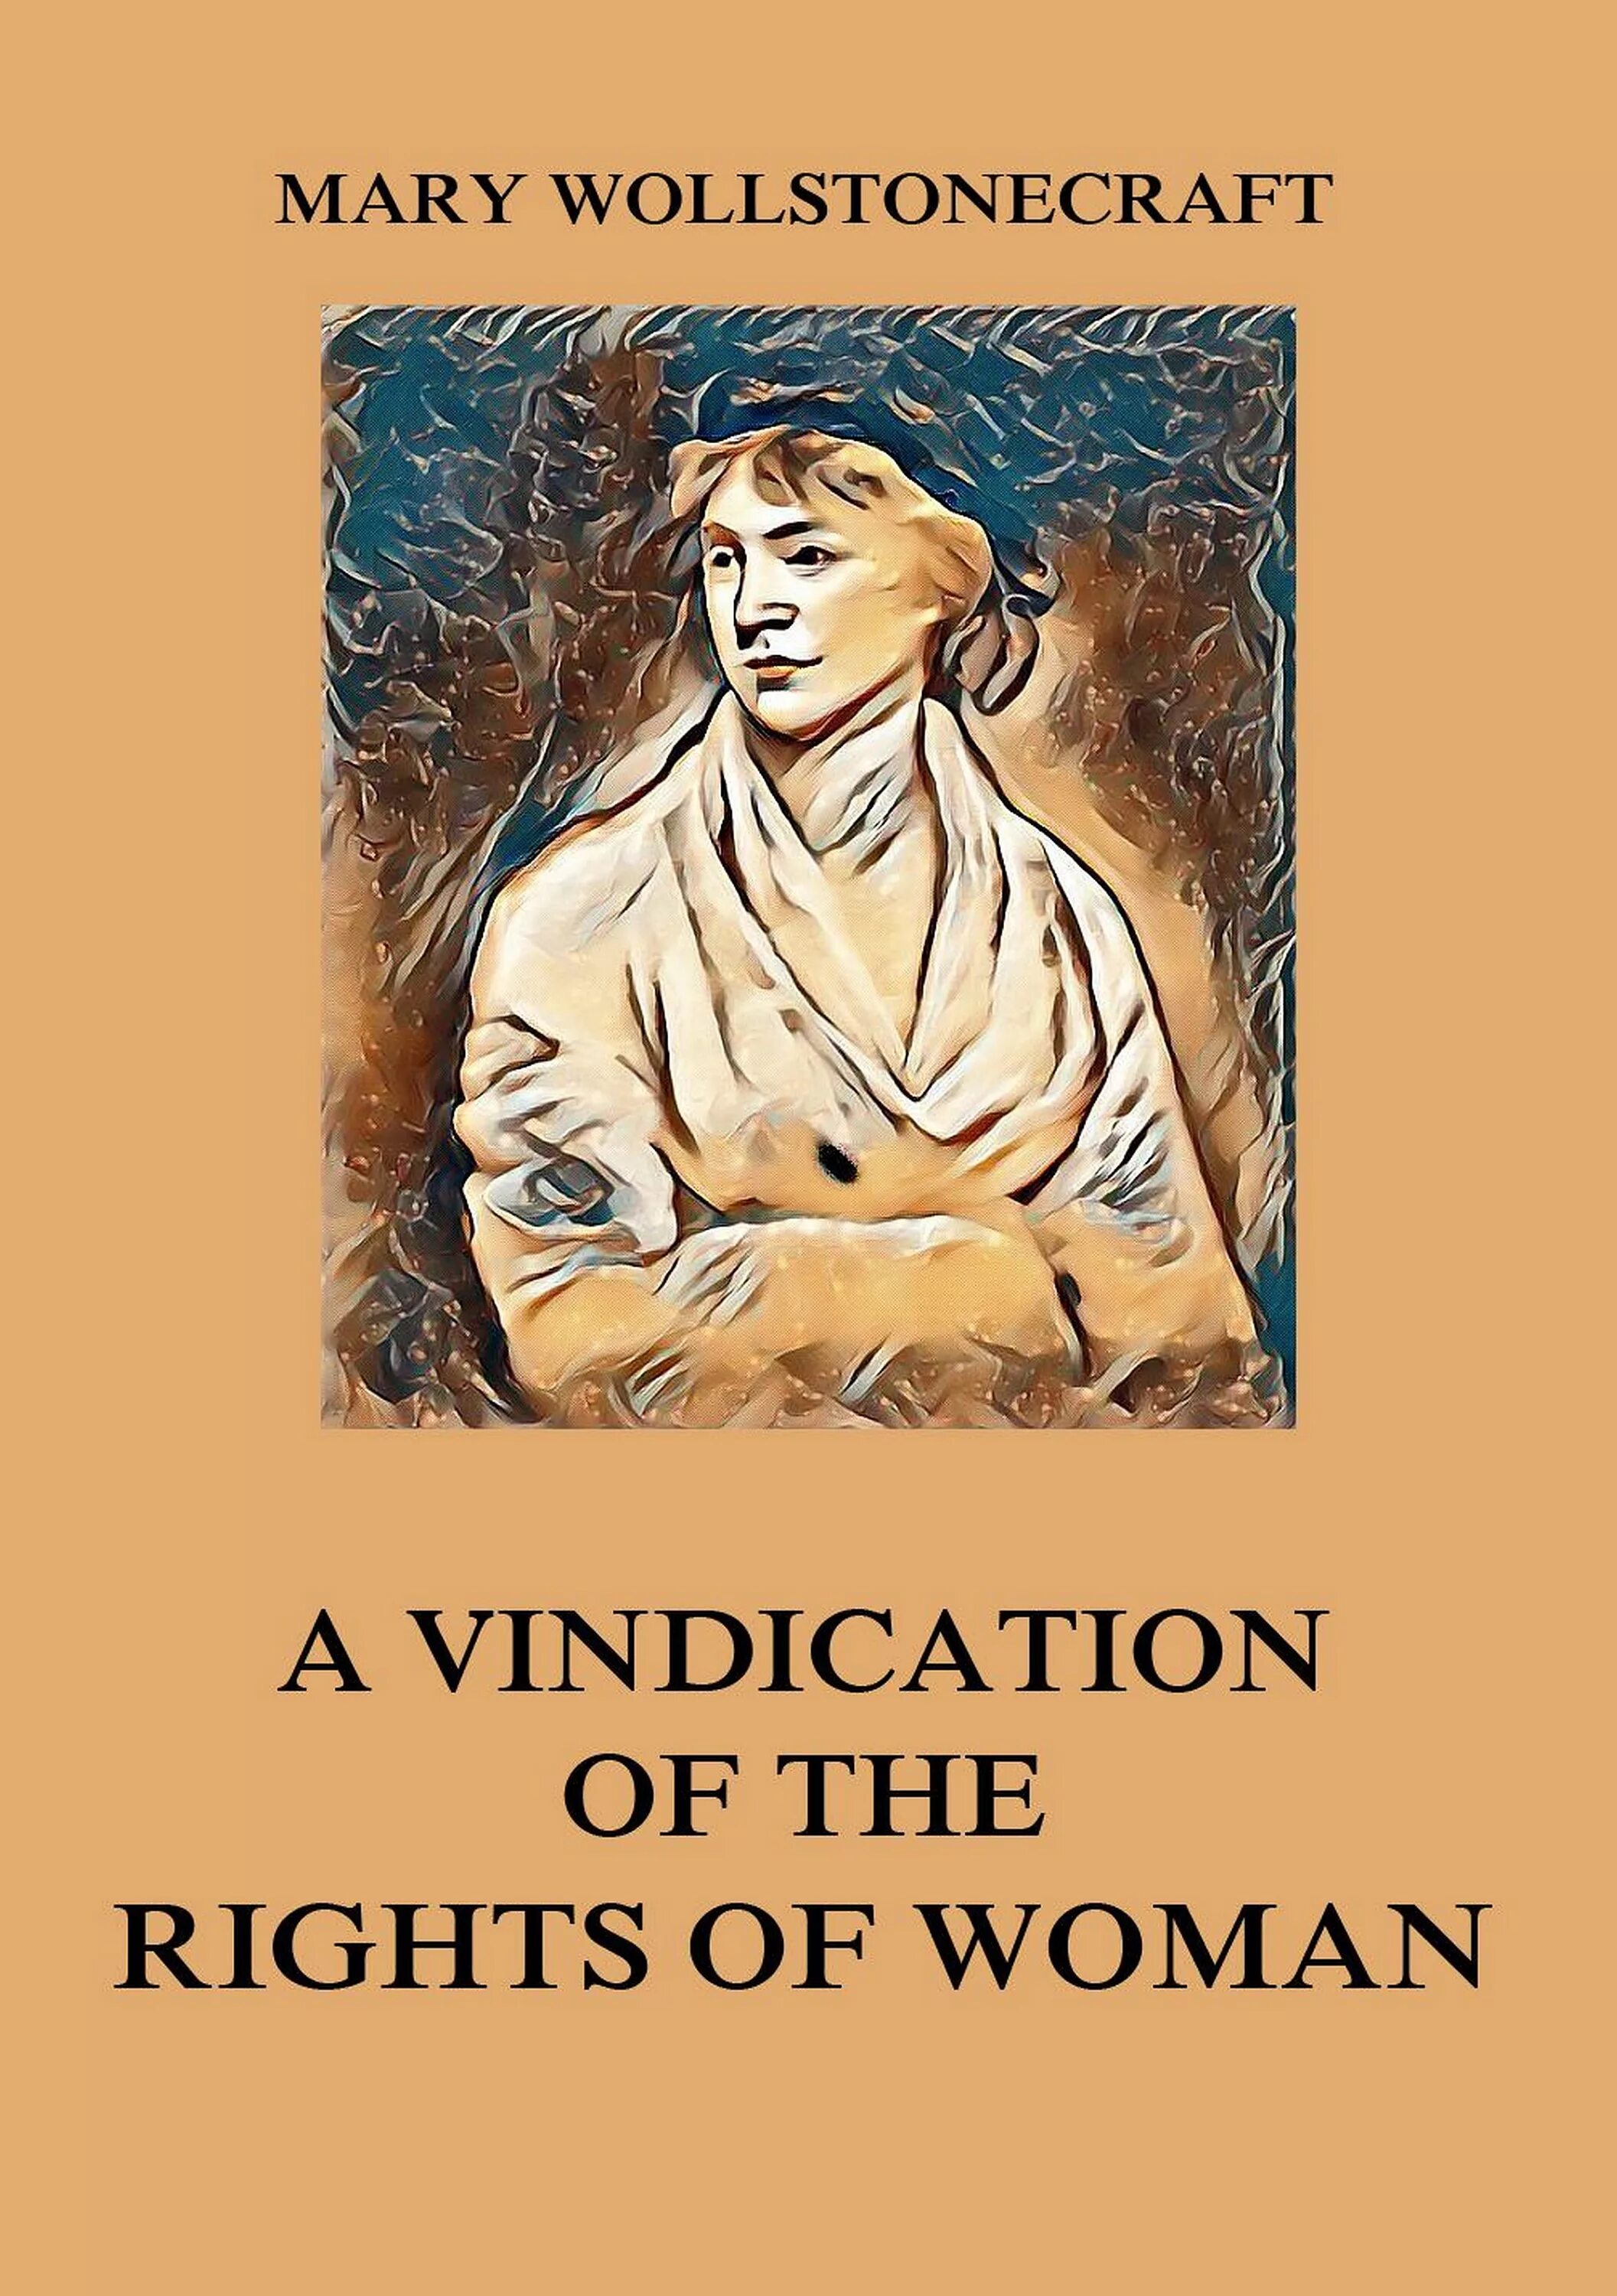 Mary woman. A Vindication of the rights of woman. Mary Wollstonecraft's Vindication of the rights of women (.